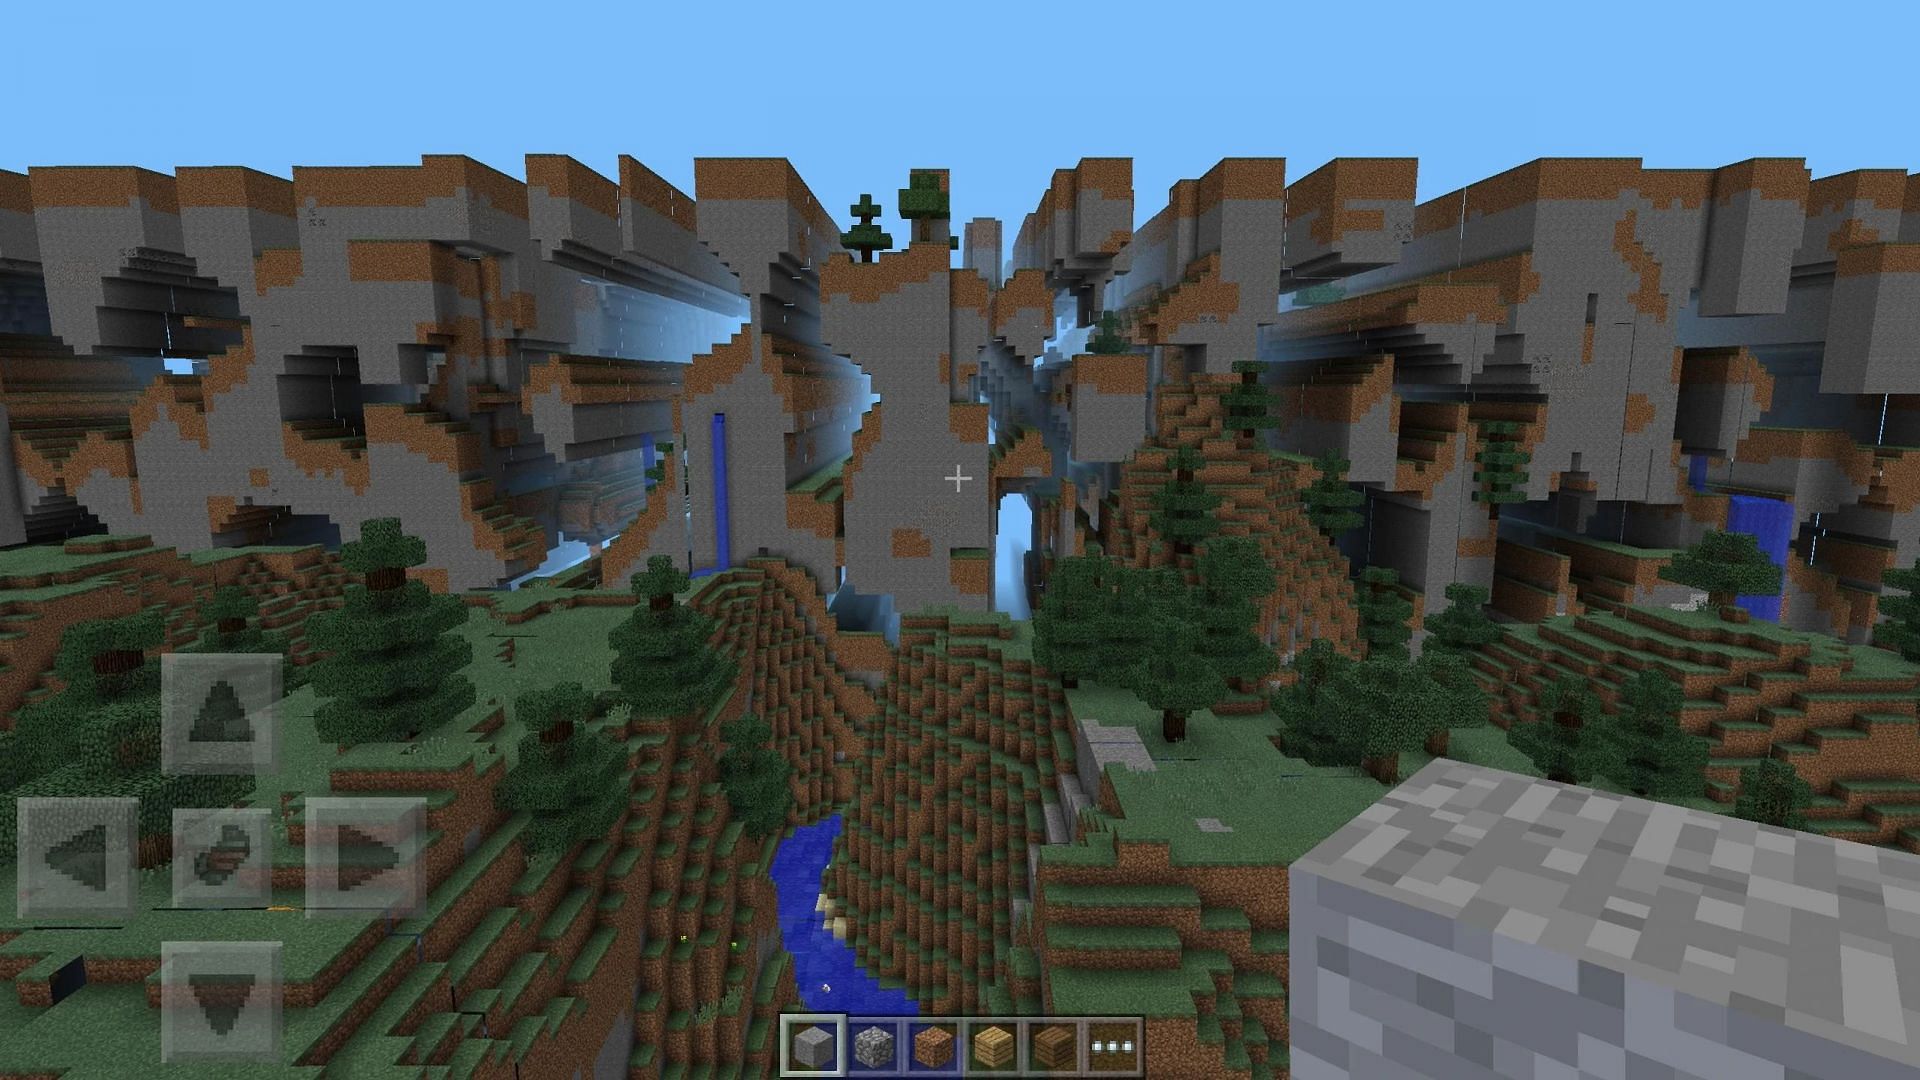 Far Lands was one of the most fascinating terrain glitches in Minecraft Pocket Edition. (Image via Mojang)